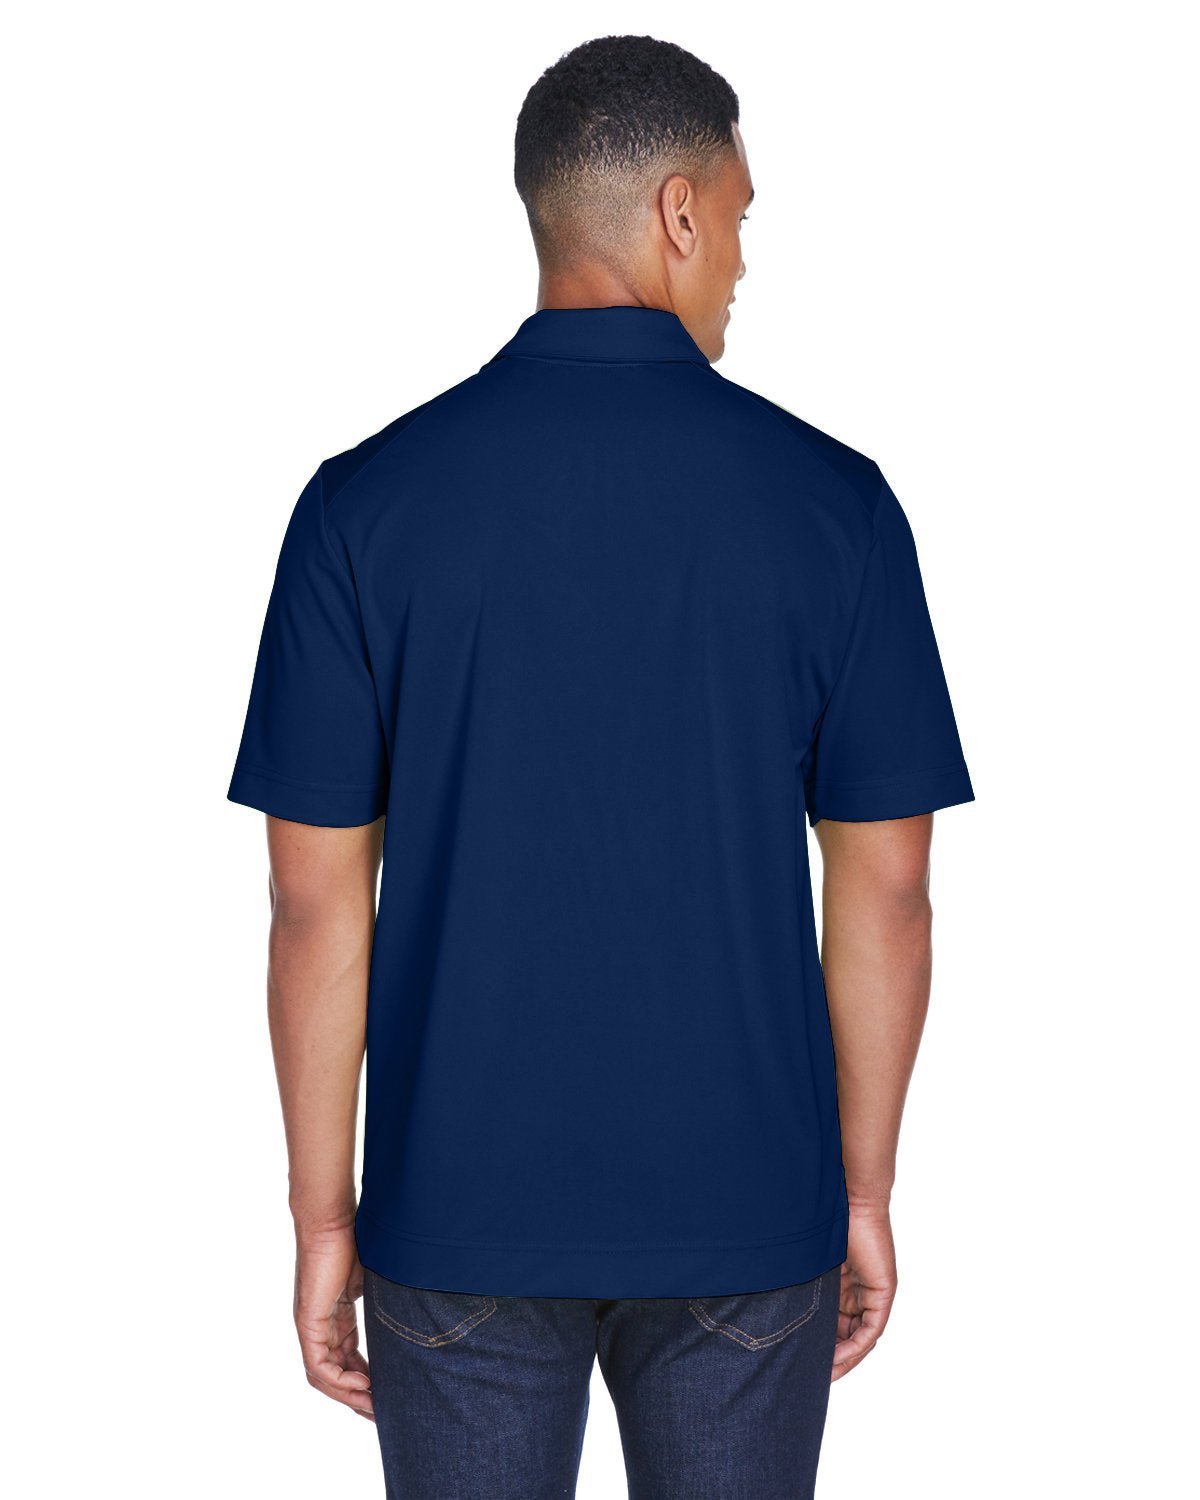 88632-North End-NIGHT-North End-Polos-2